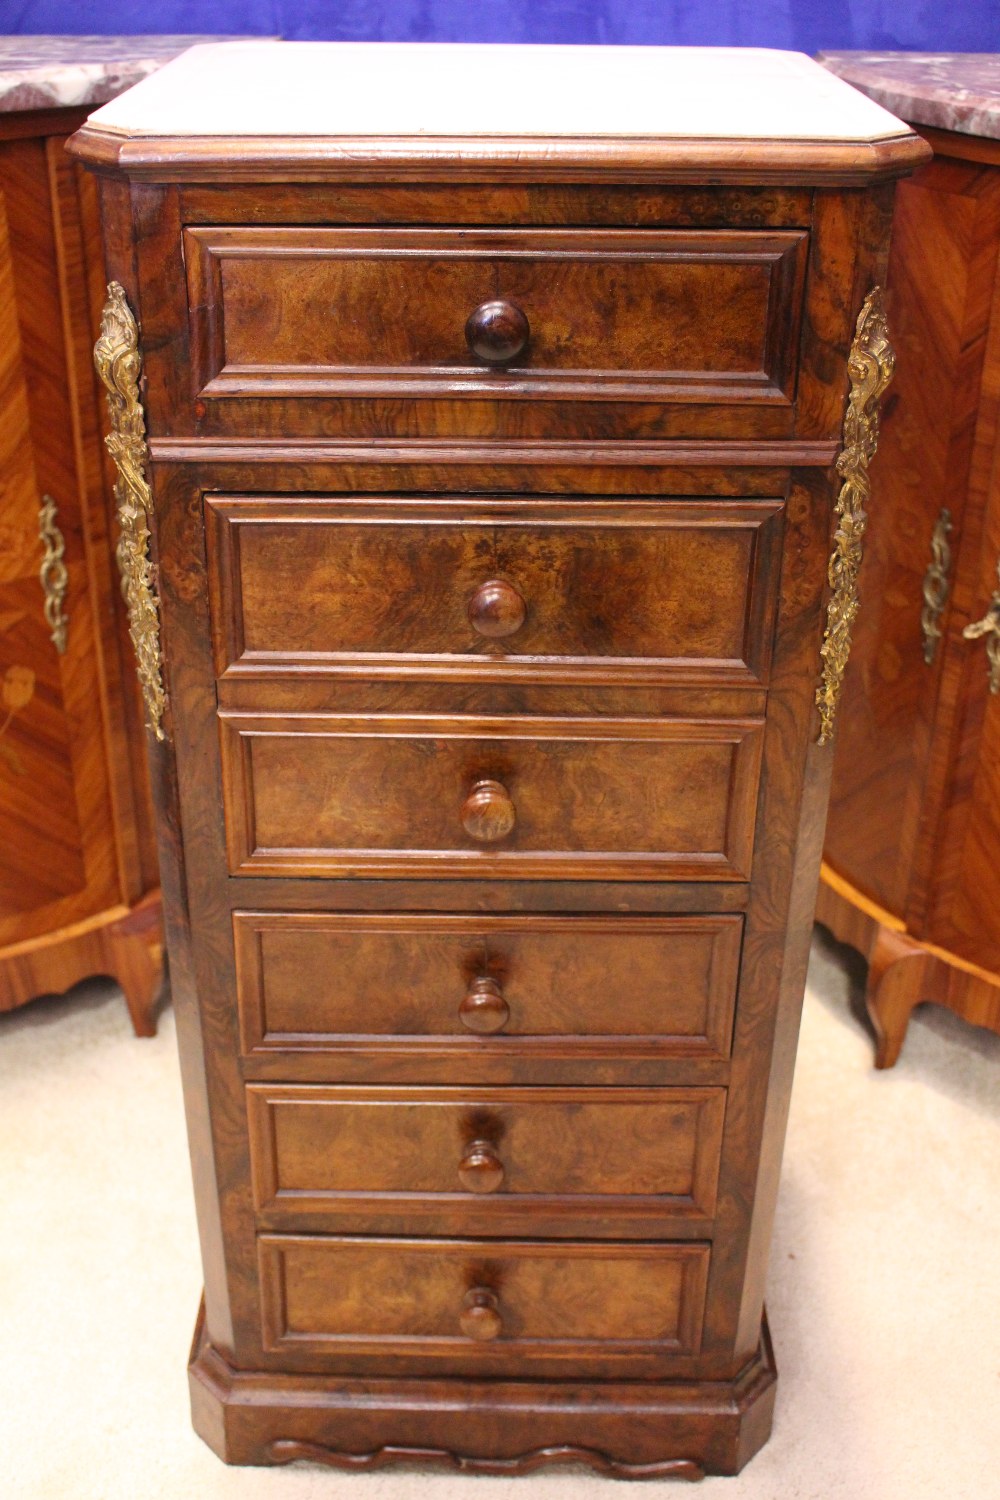 A MARBLE TOPPED CABINET, with canted corners, the front with ormolu mounts, 1 drawer over a drop